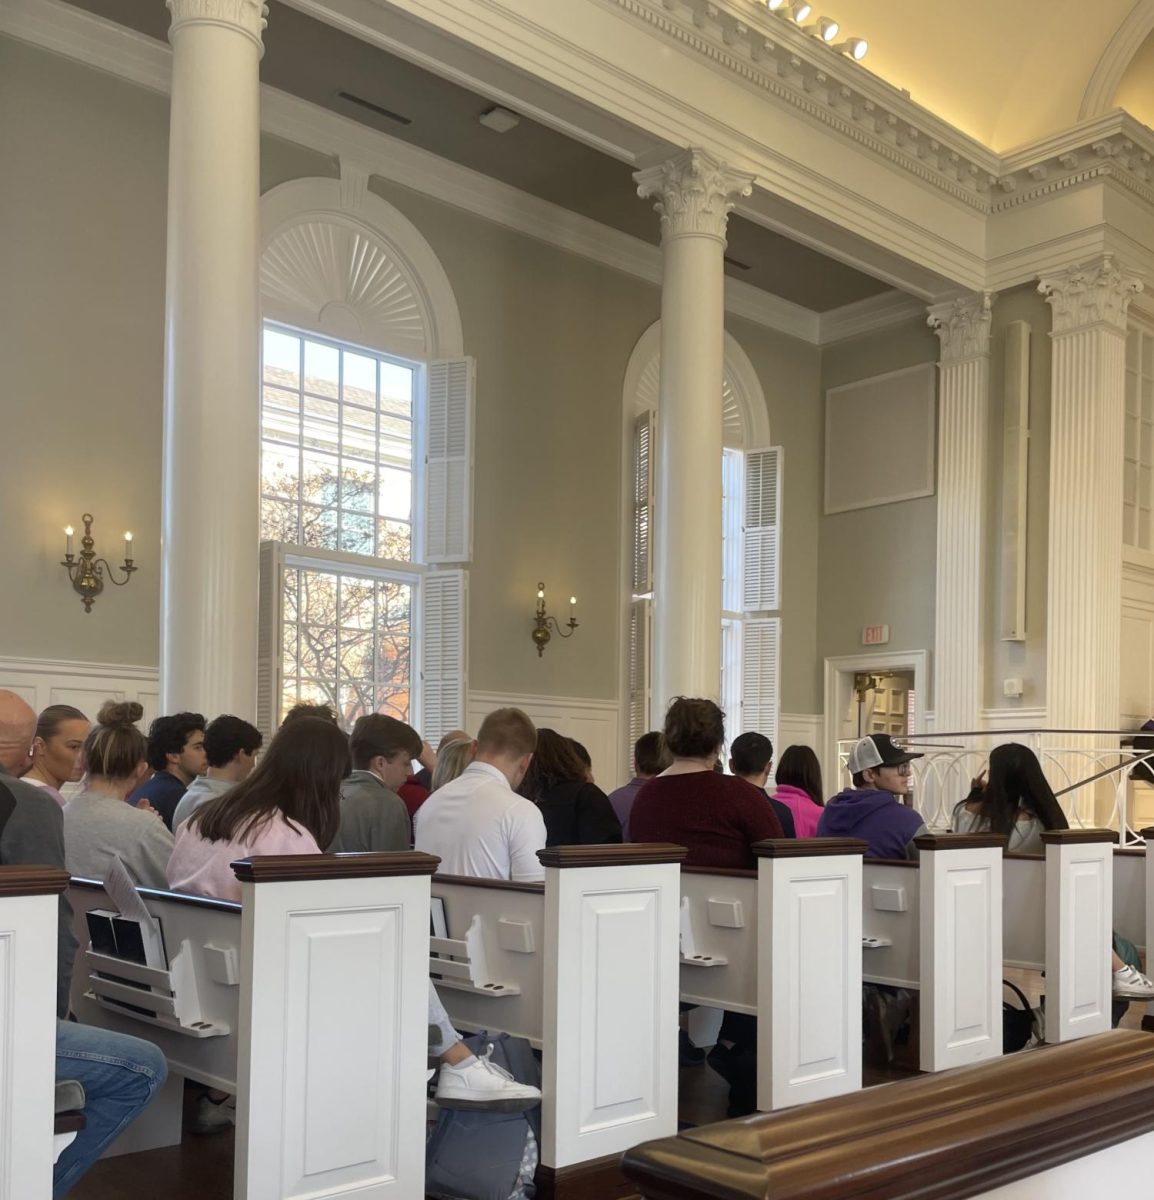 People sit in the pews of Robert Carr Chapel on Wednesday, Feb. 14 for Ash Wednesday service. (Aliyah Howell/Staff Photographer)